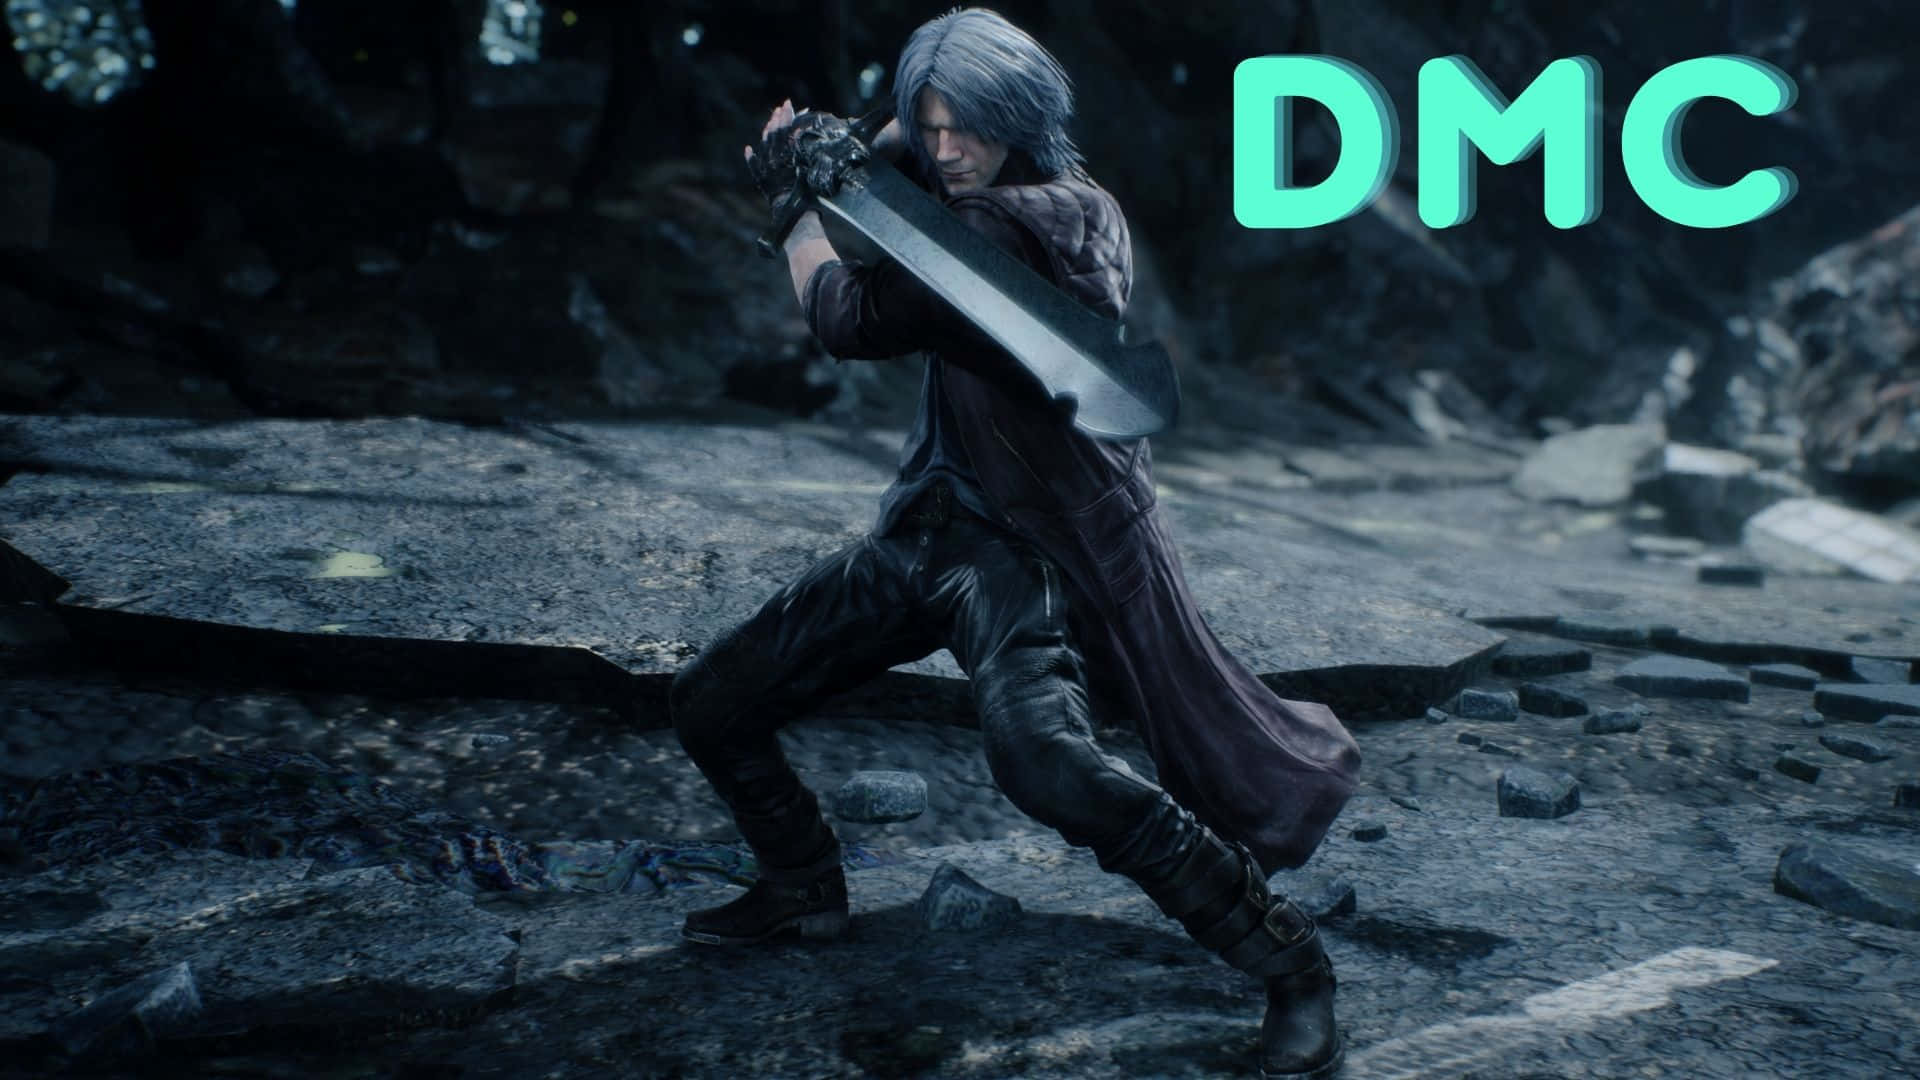 Dante, The Protagonist From The Devil May Cry Series, In A Dynamic Fighting Pose, Wielding His Signature Sword Rebellion. Wallpaper